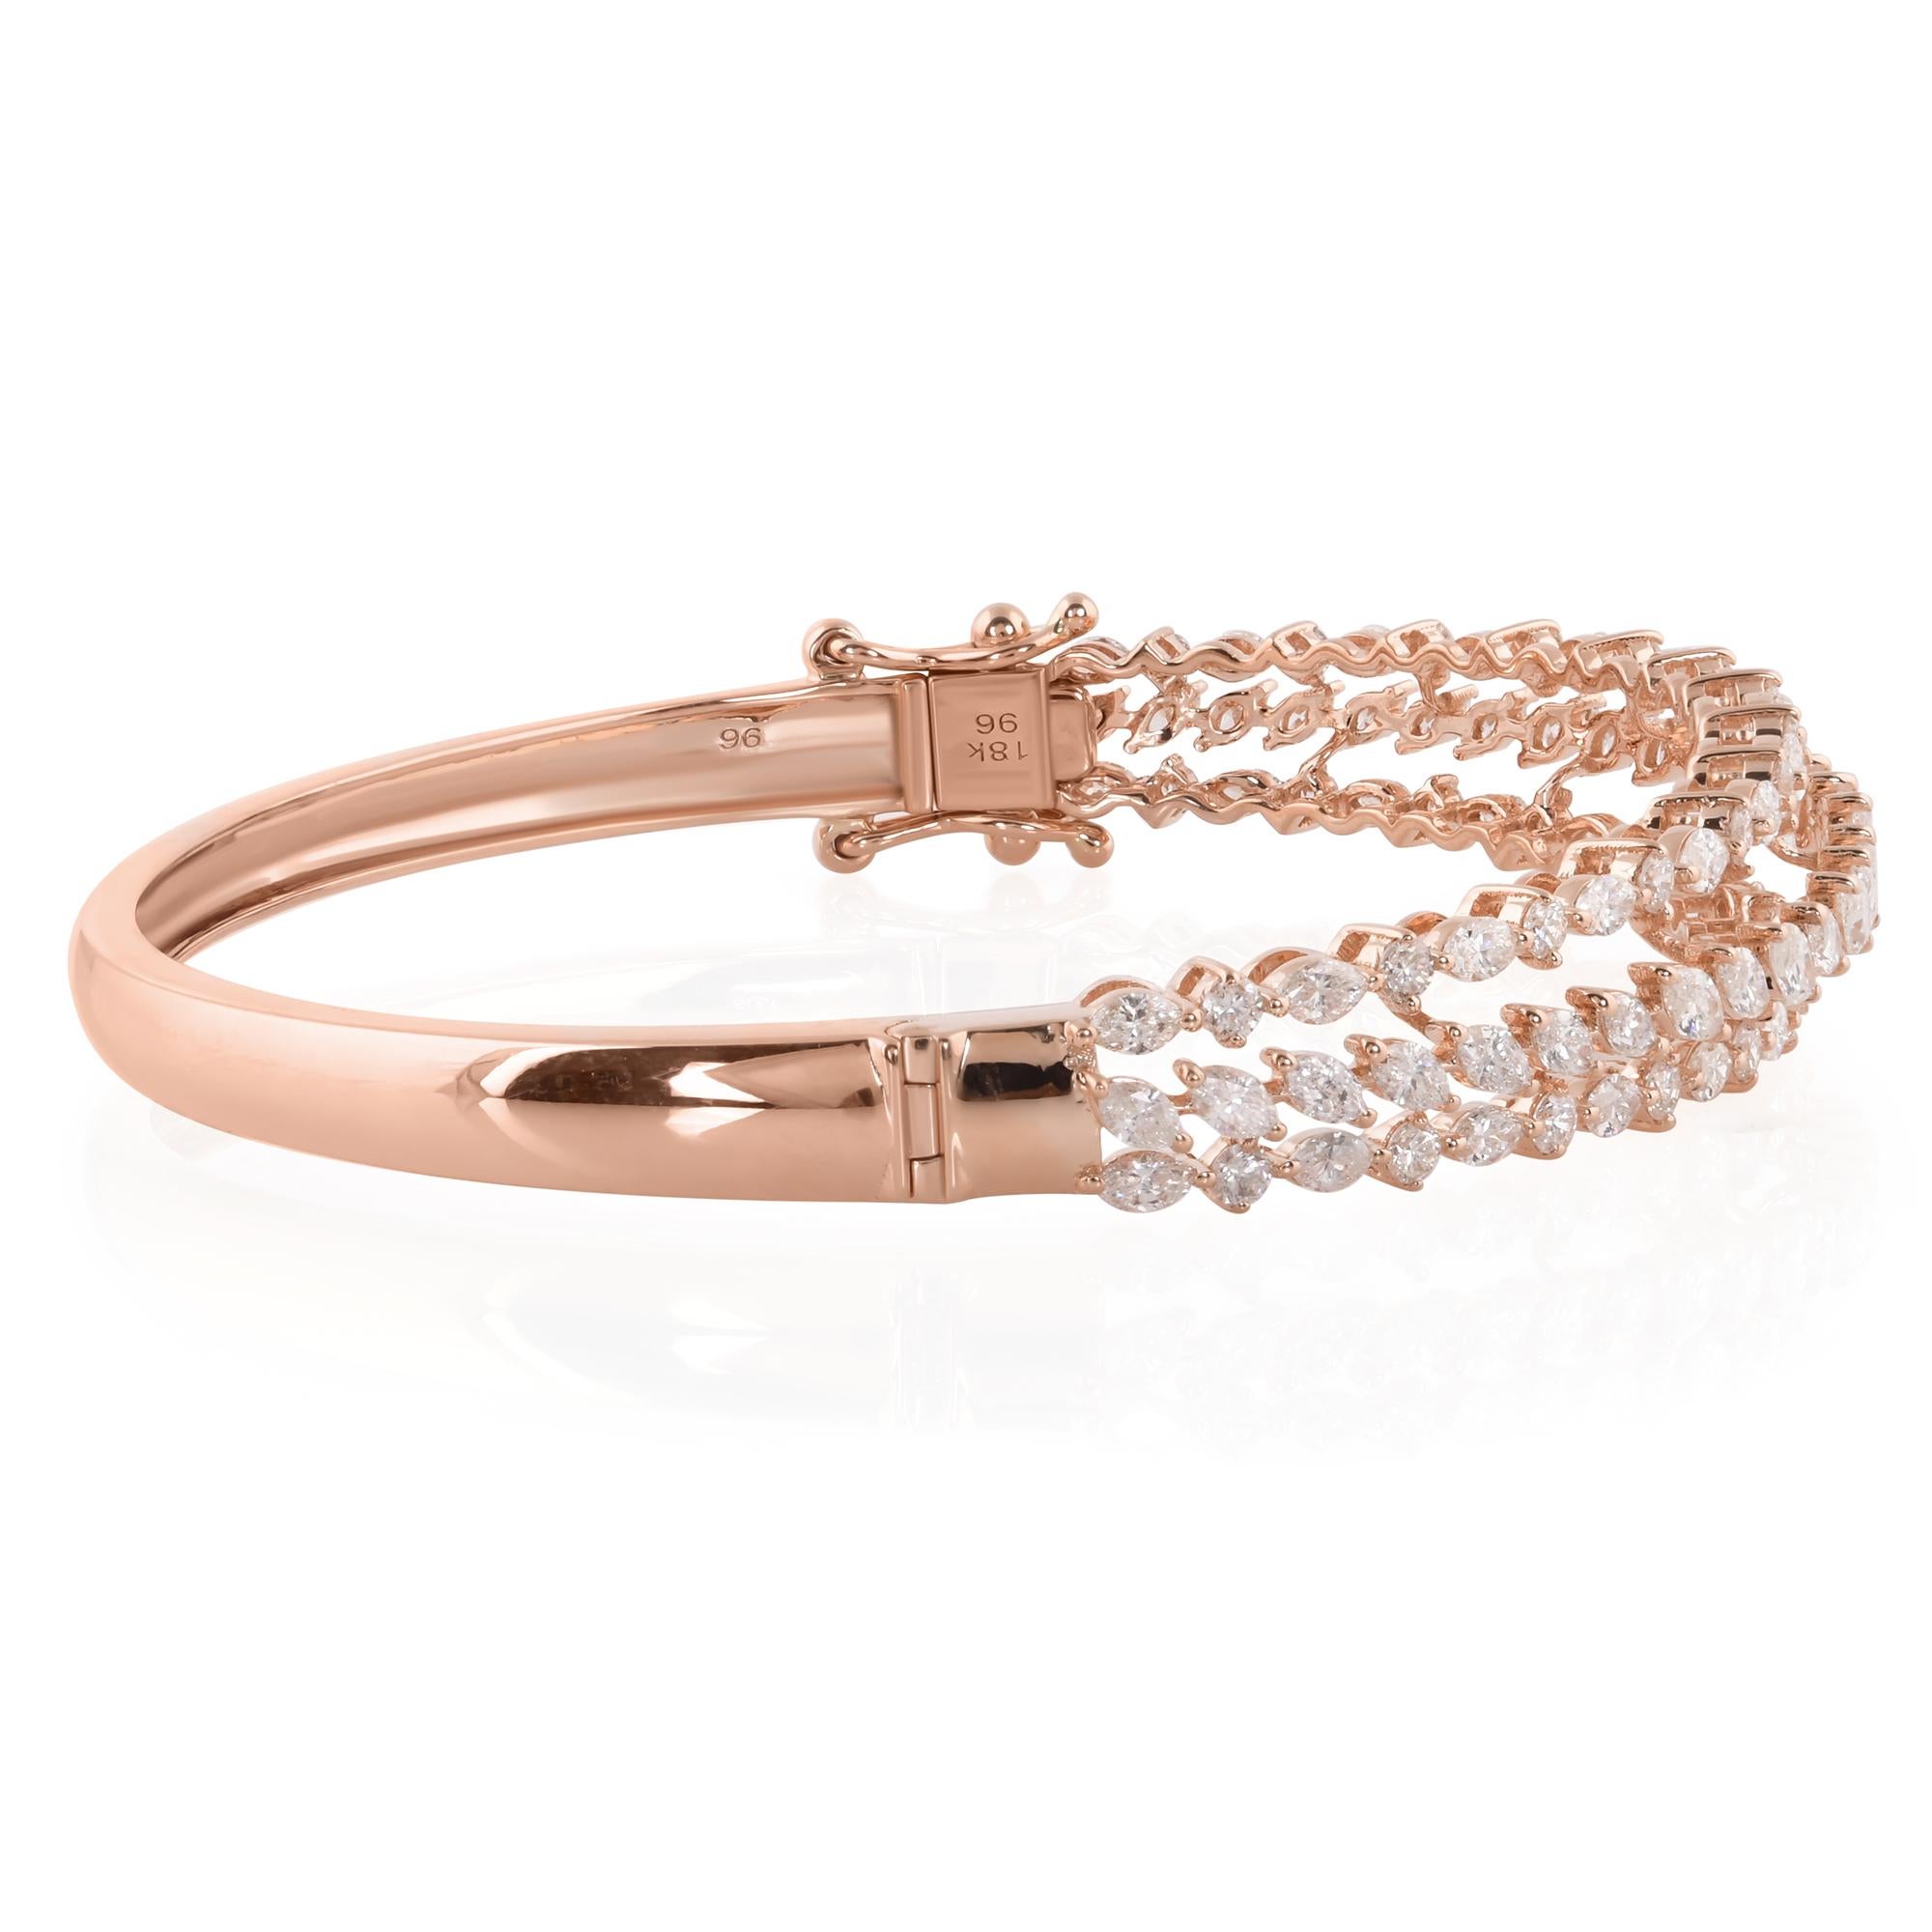 Elevate your style with the exquisite beauty of this stunning bangle bracelet, meticulously crafted from 14 karat rose gold and adorned with shimmering diamonds. With a captivating blend of round and marquise-cut diamonds, this bracelet is a true